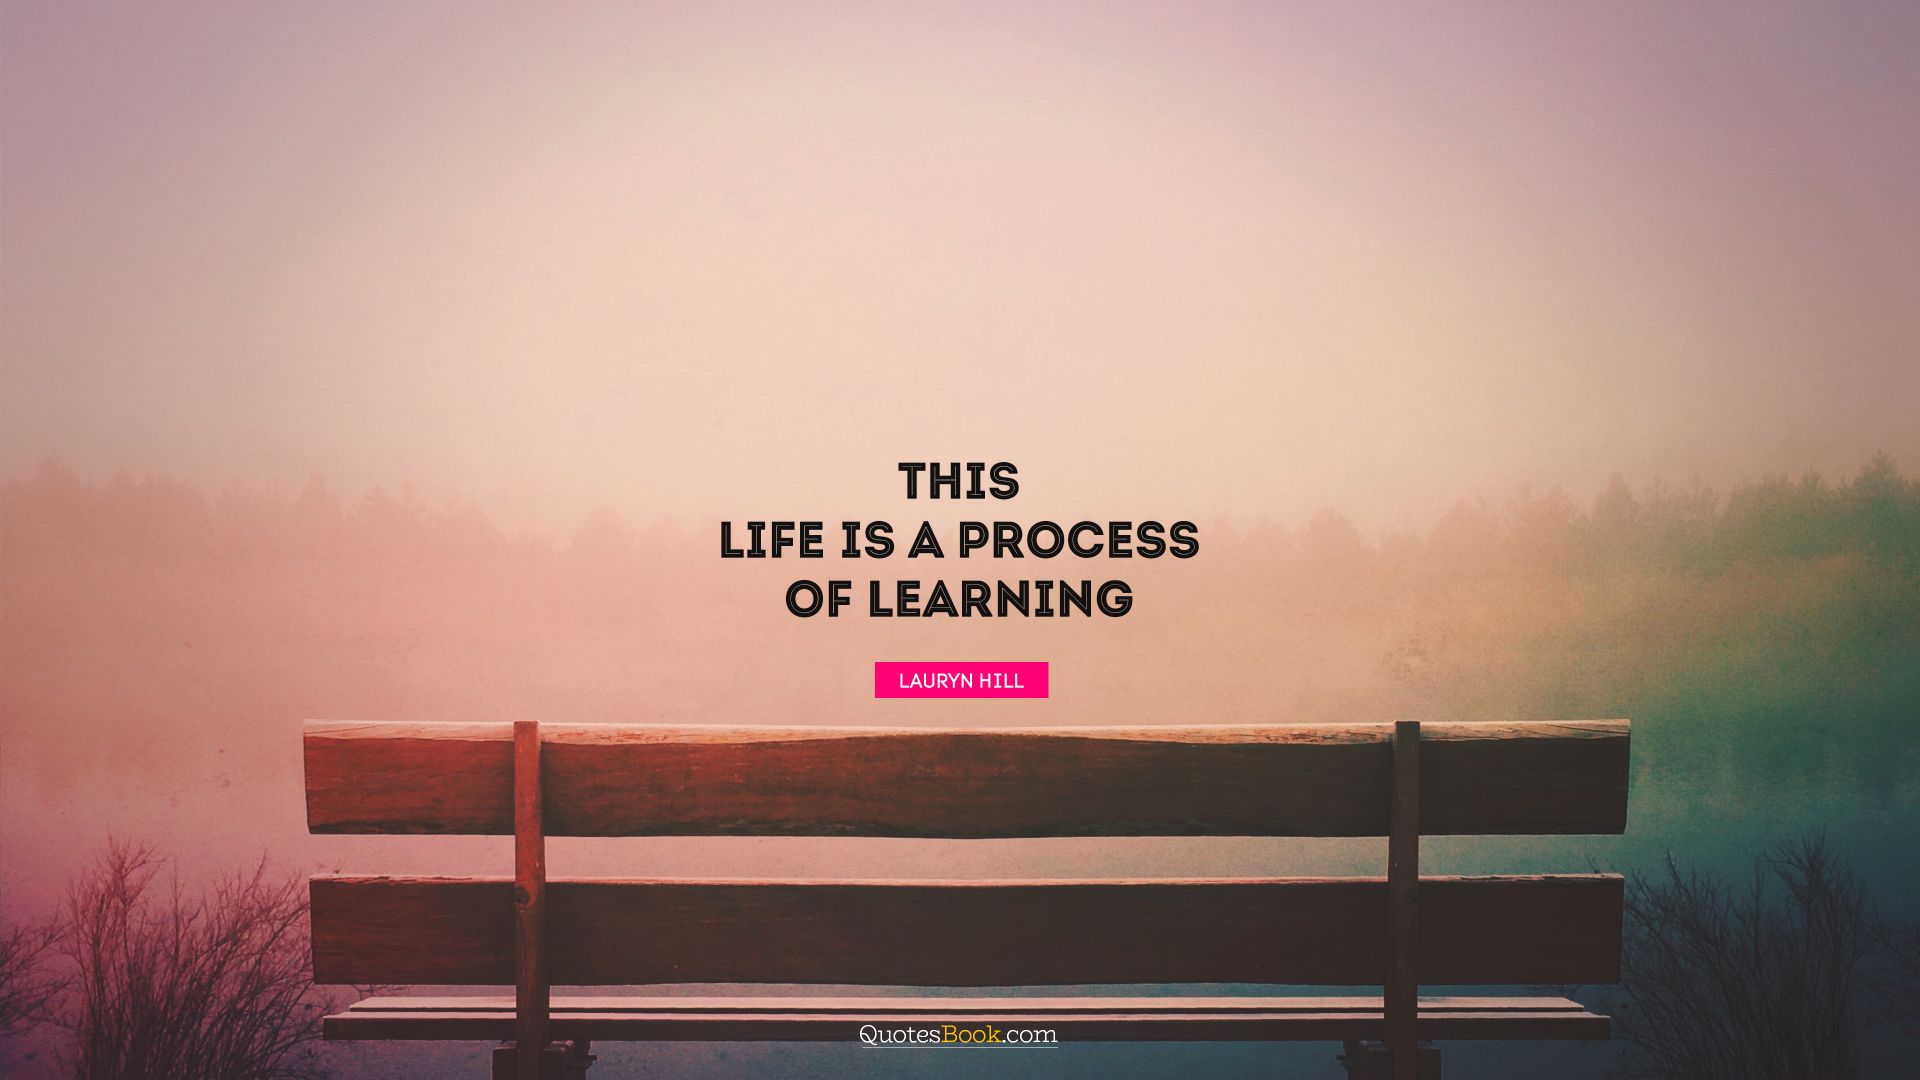 This life is a process of learning. - Quote by Lauryn Hill